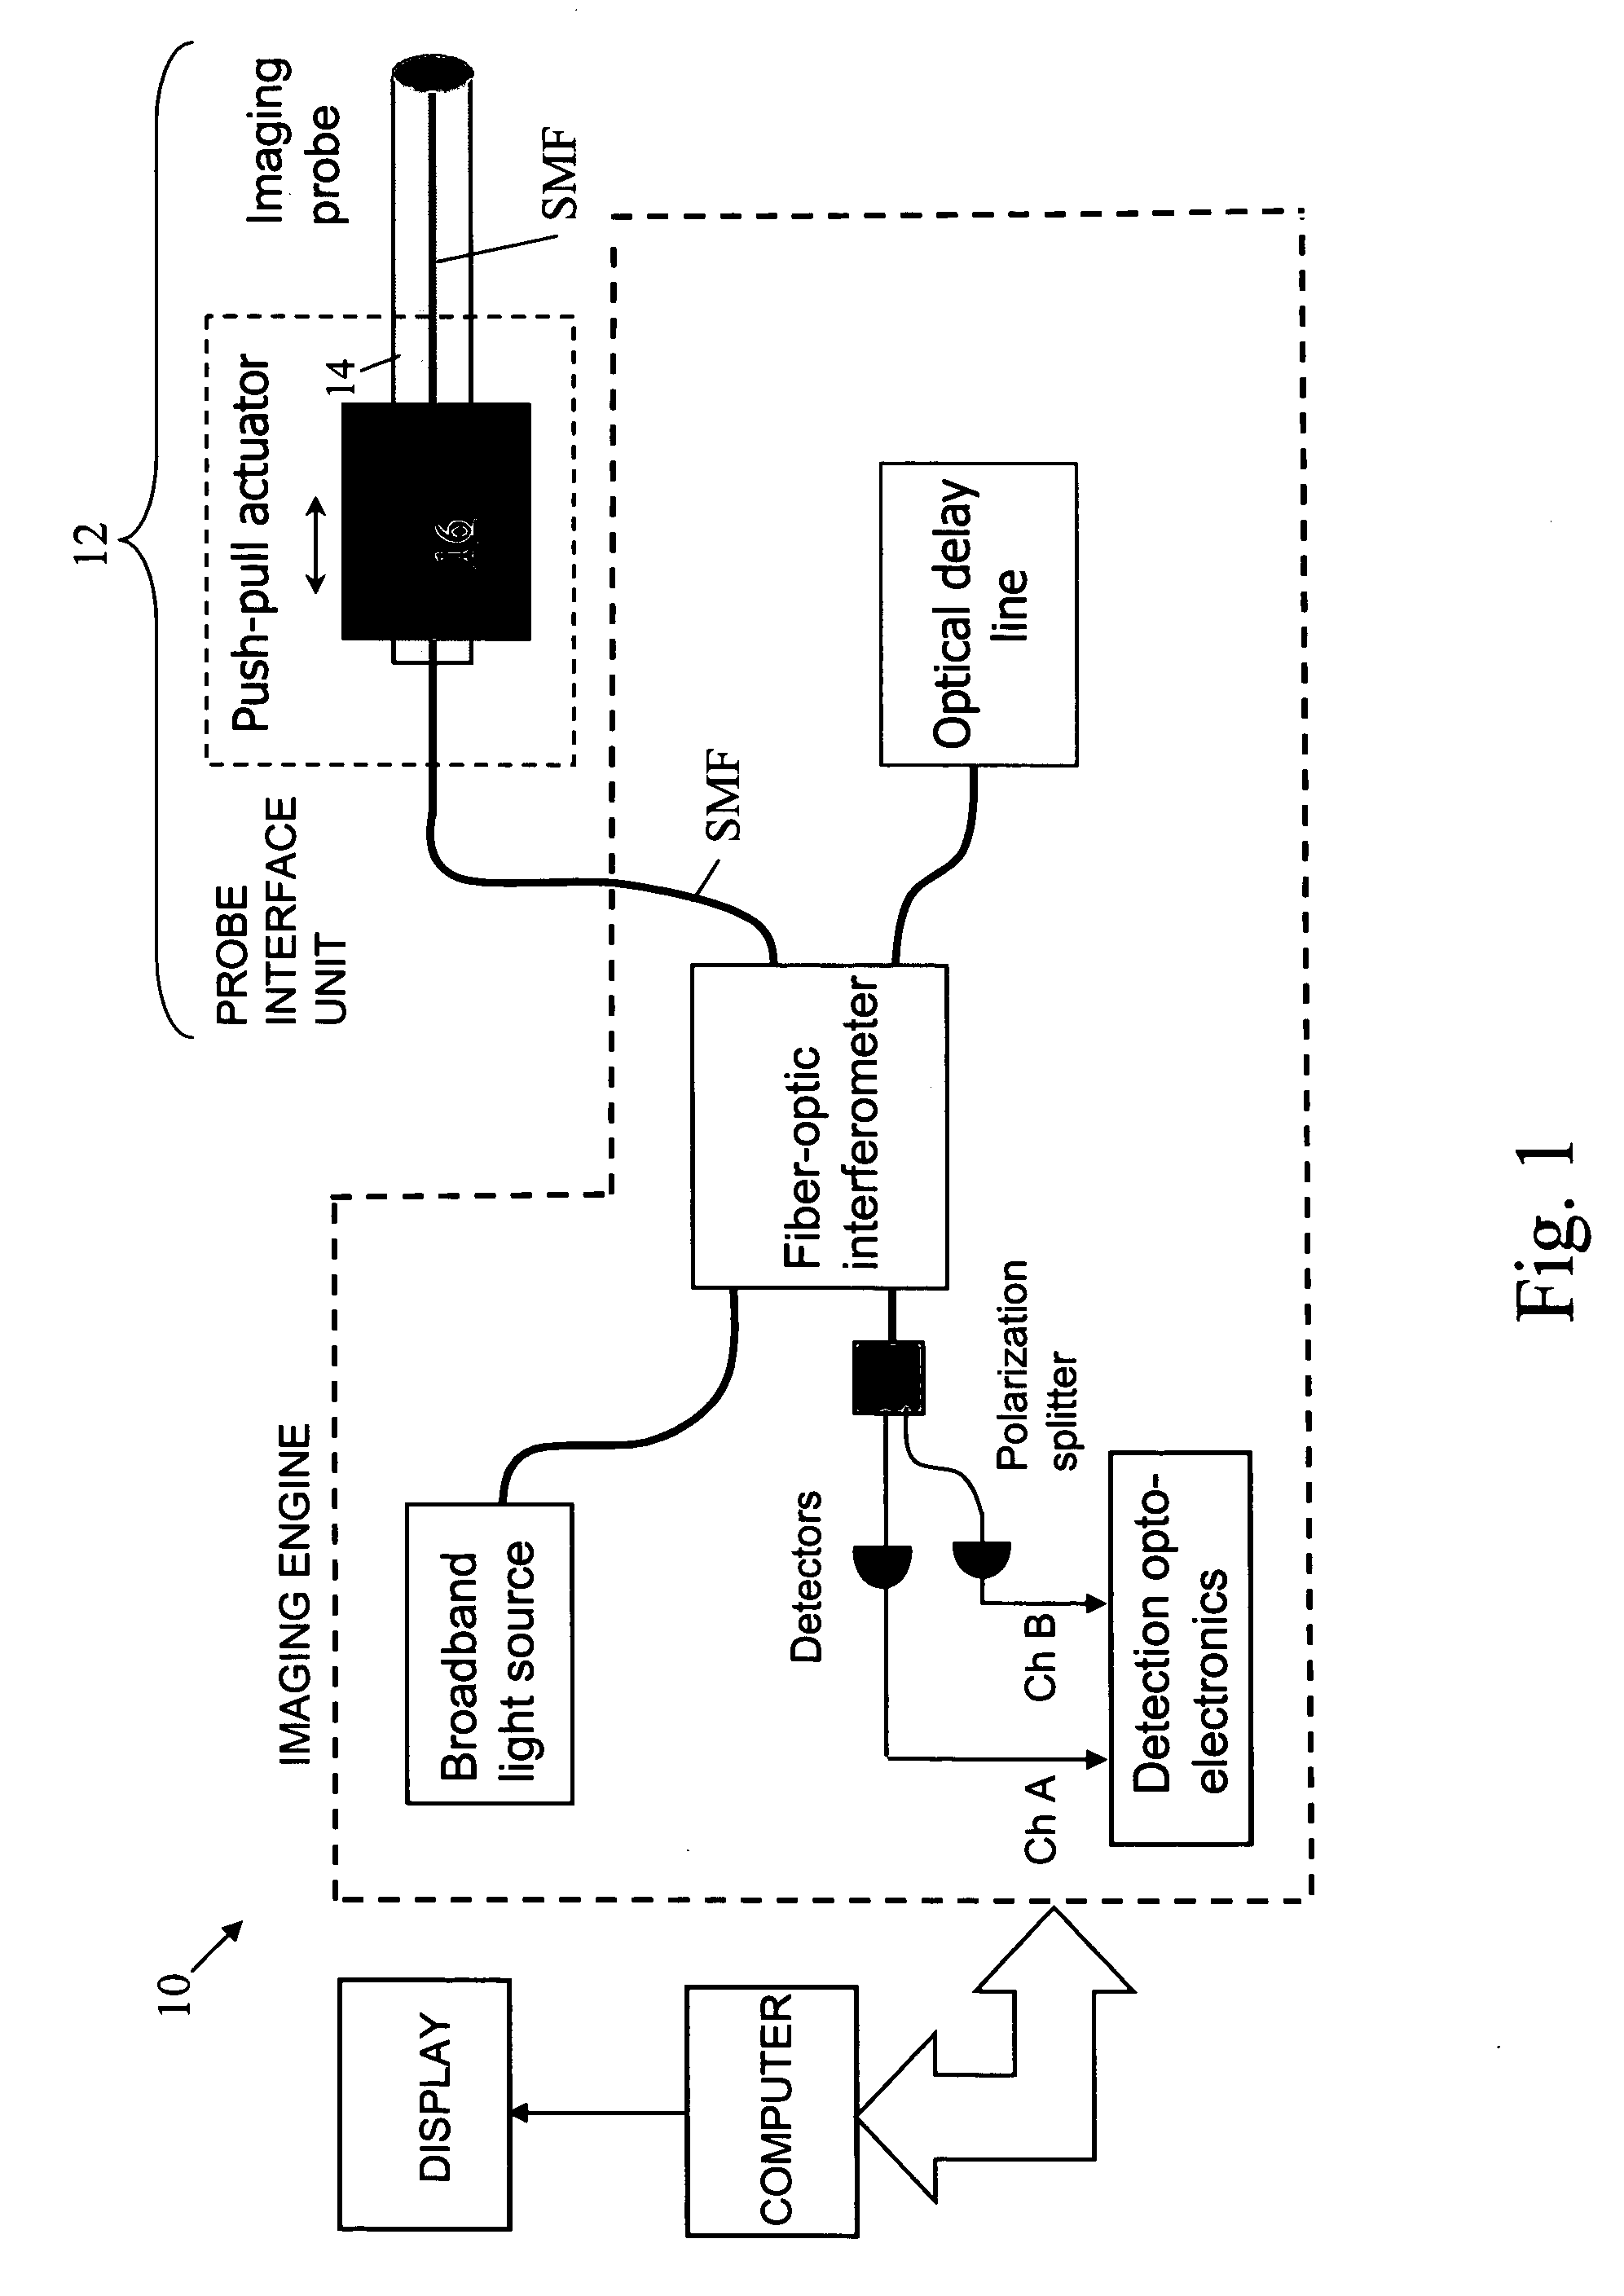 Optical coherence tomography apparatus and methods